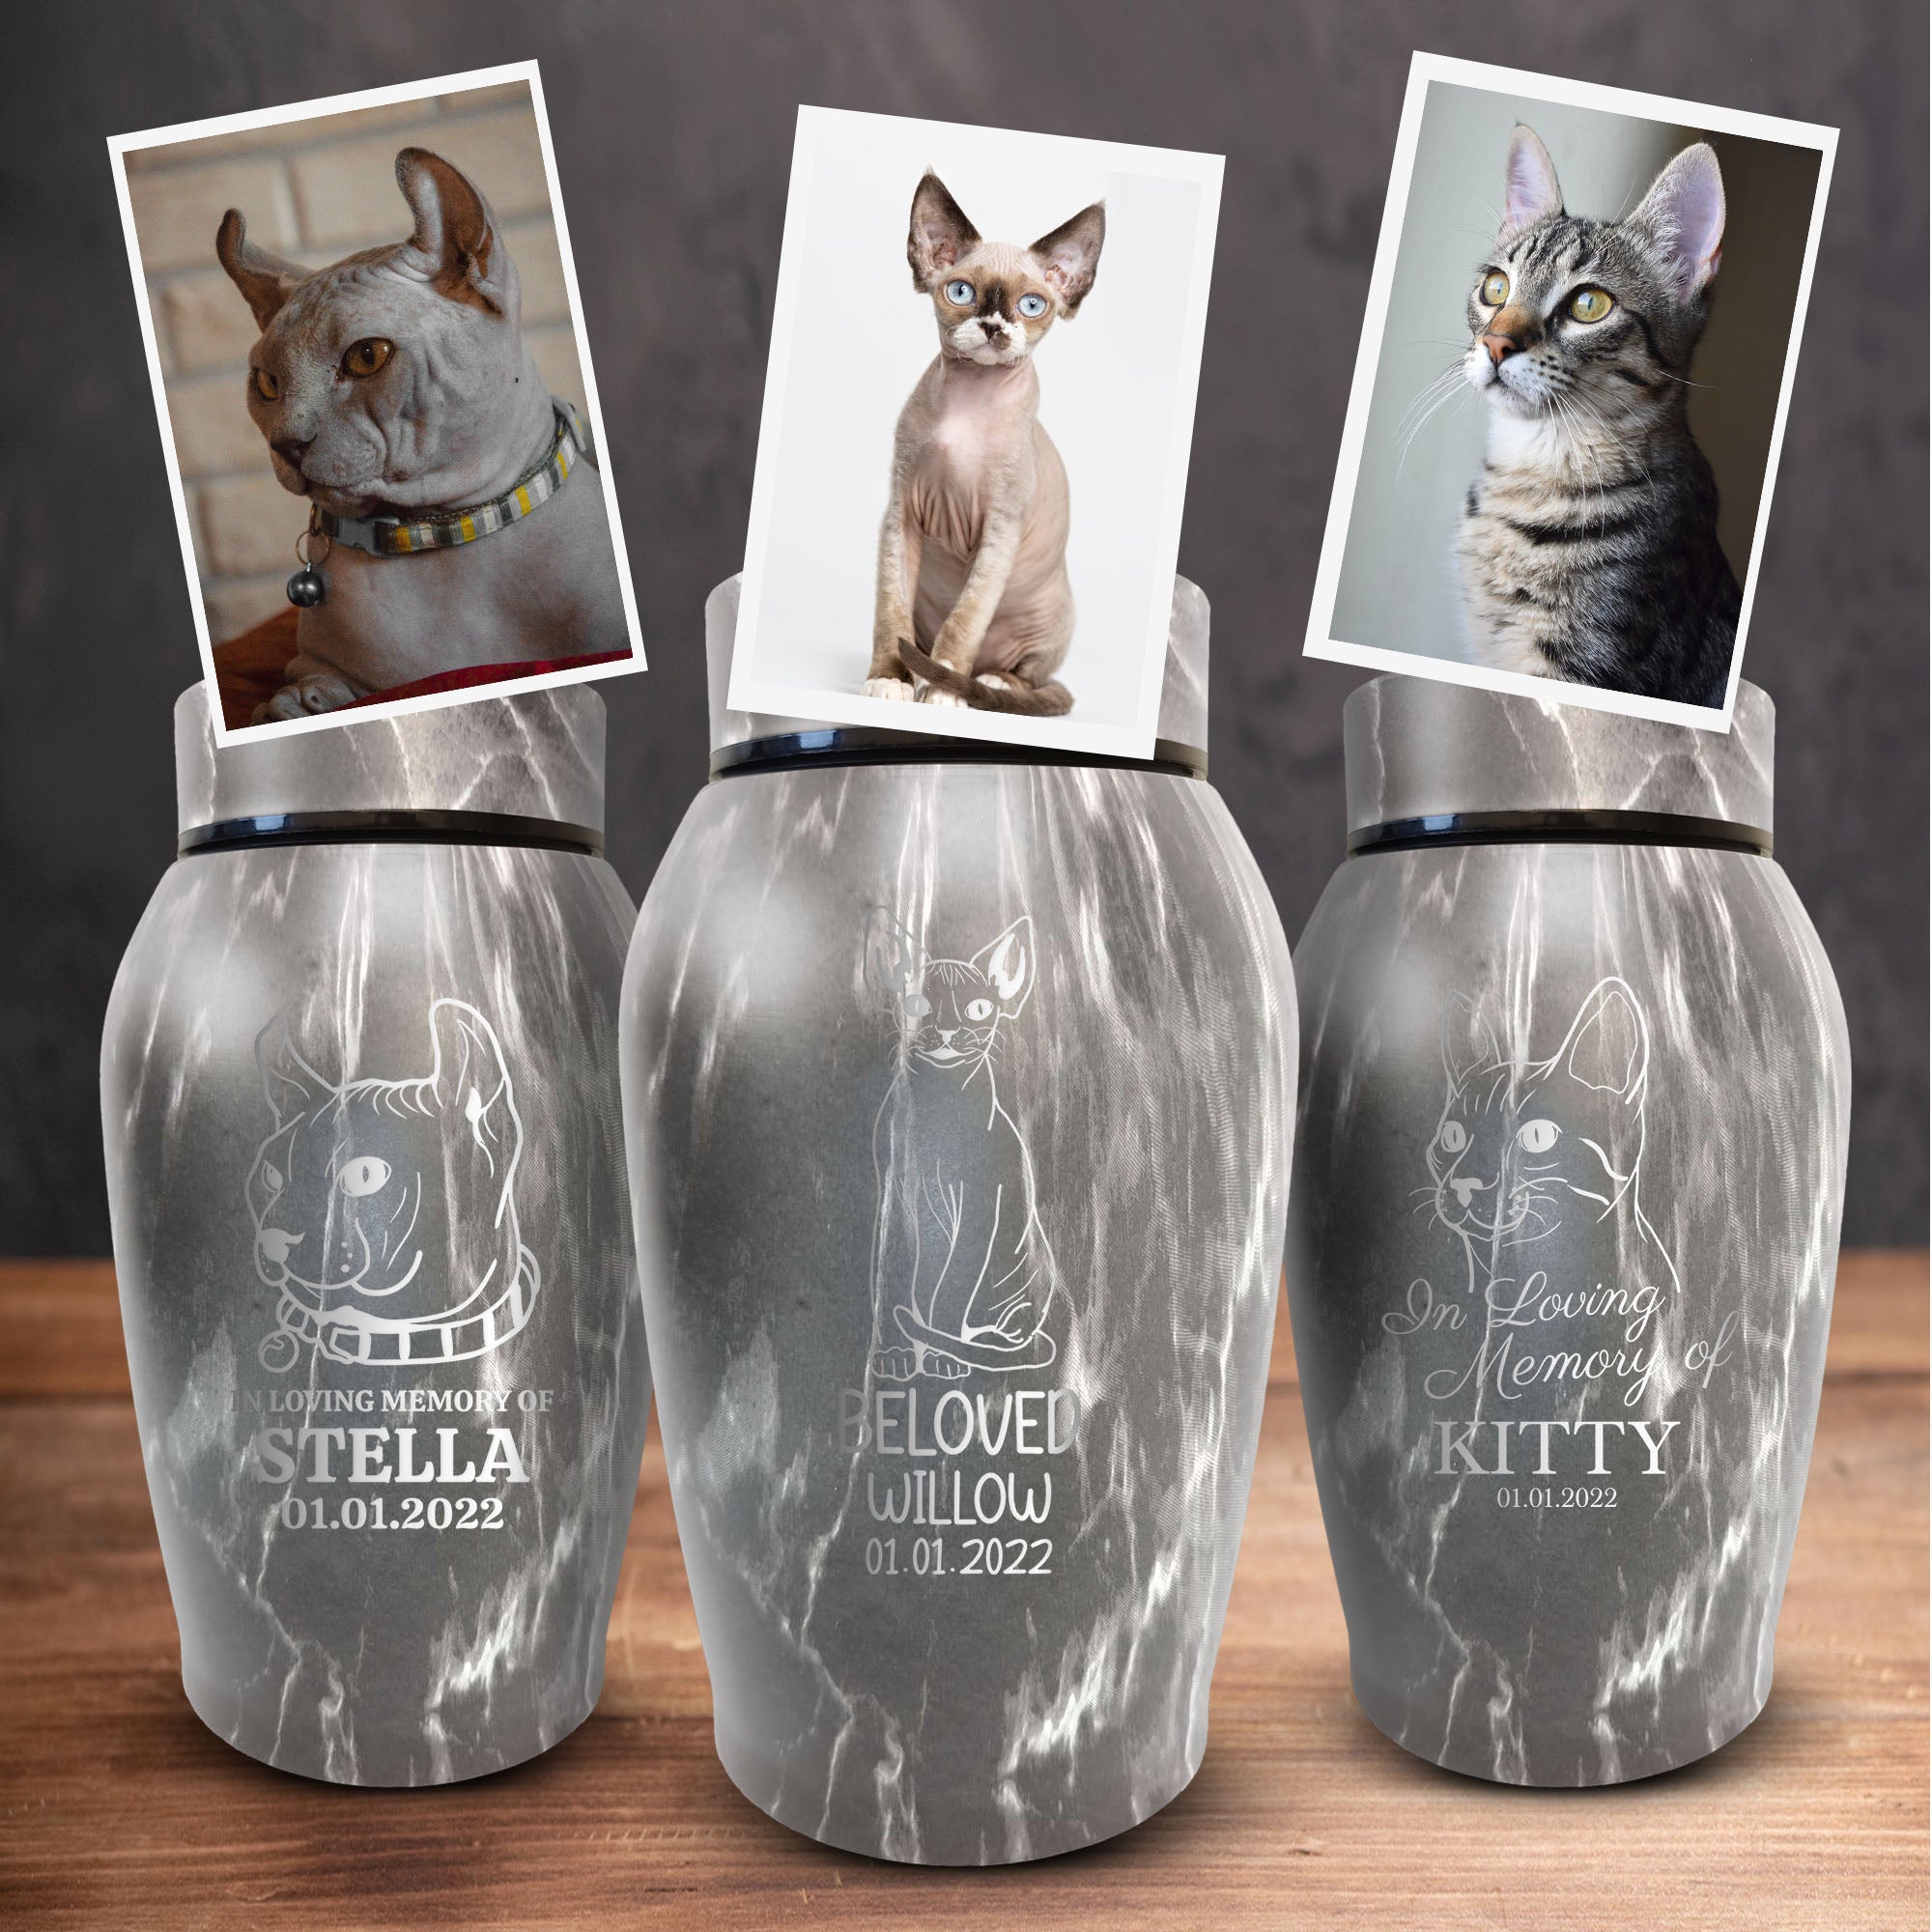 Custom Engraved Pet Photo/Image Stone Gray Urn - Personalized Textured Cremation Urn - Stainless Steel Urn for Cat Memorial Ashes | Gray